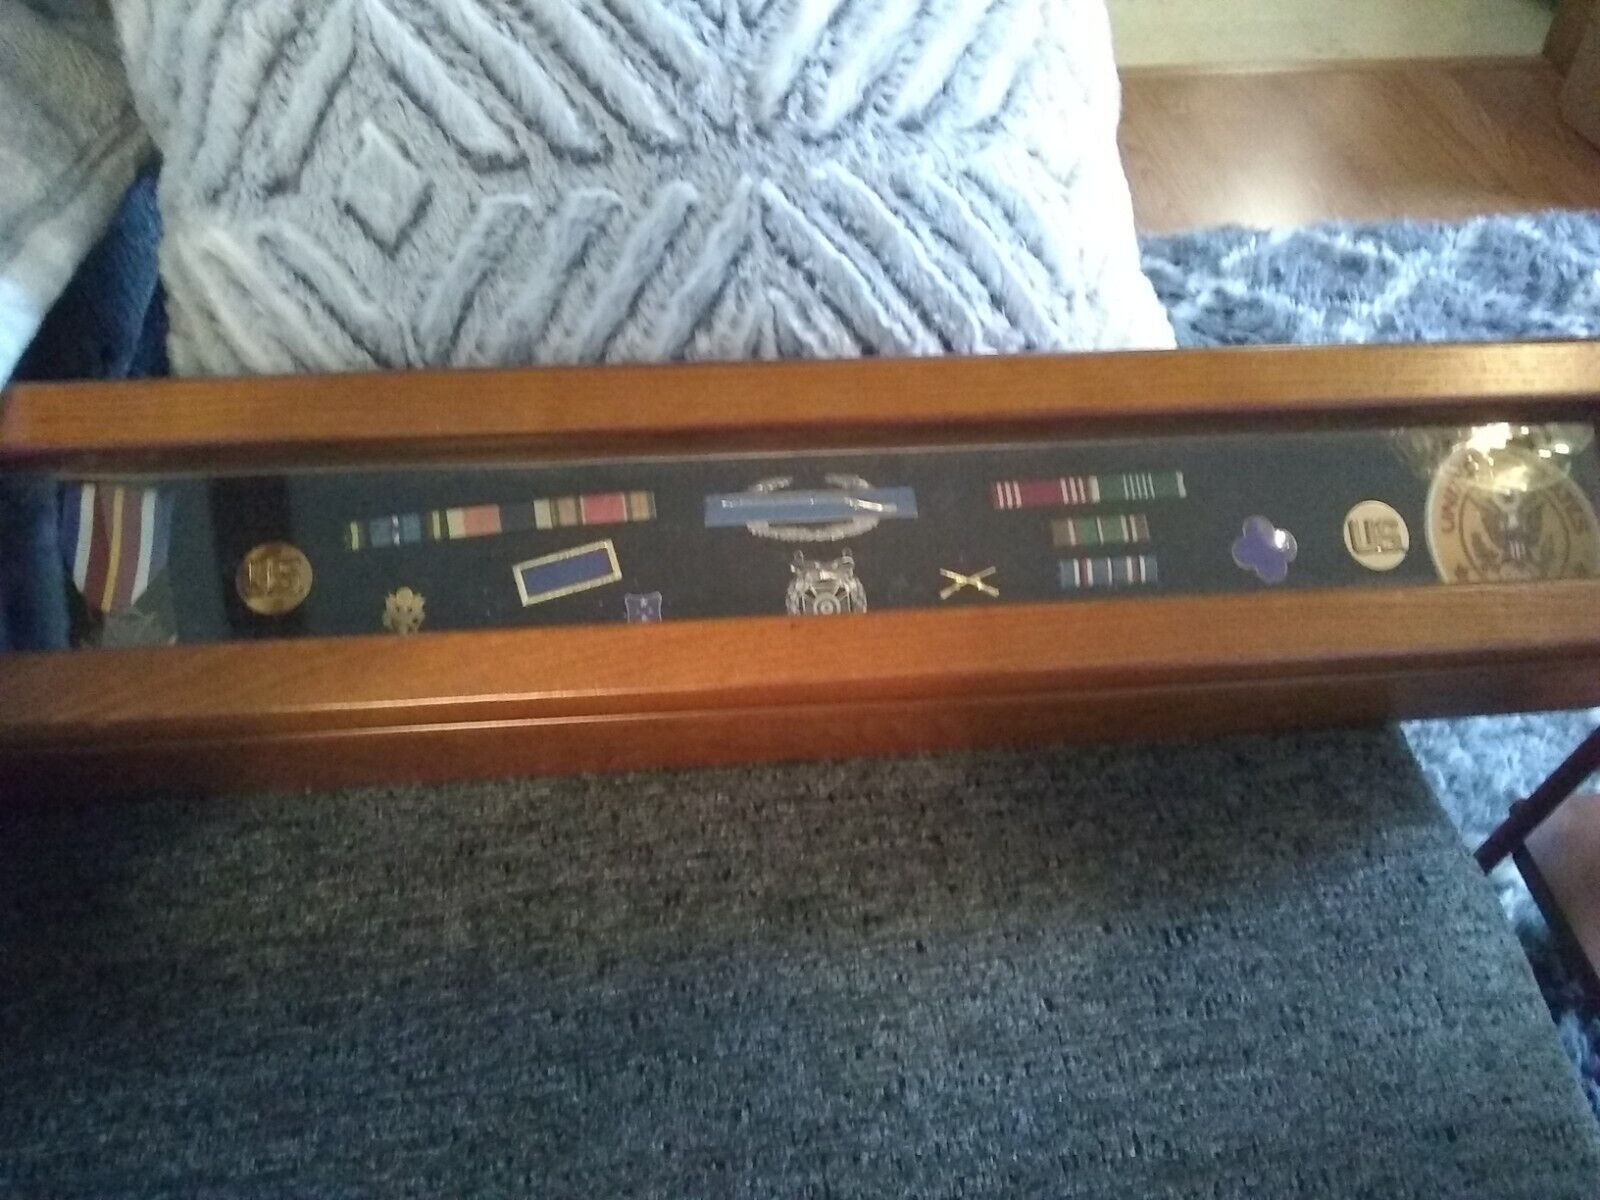 WW 2 Army Medal & Ribbons With shadowbox display case.  26